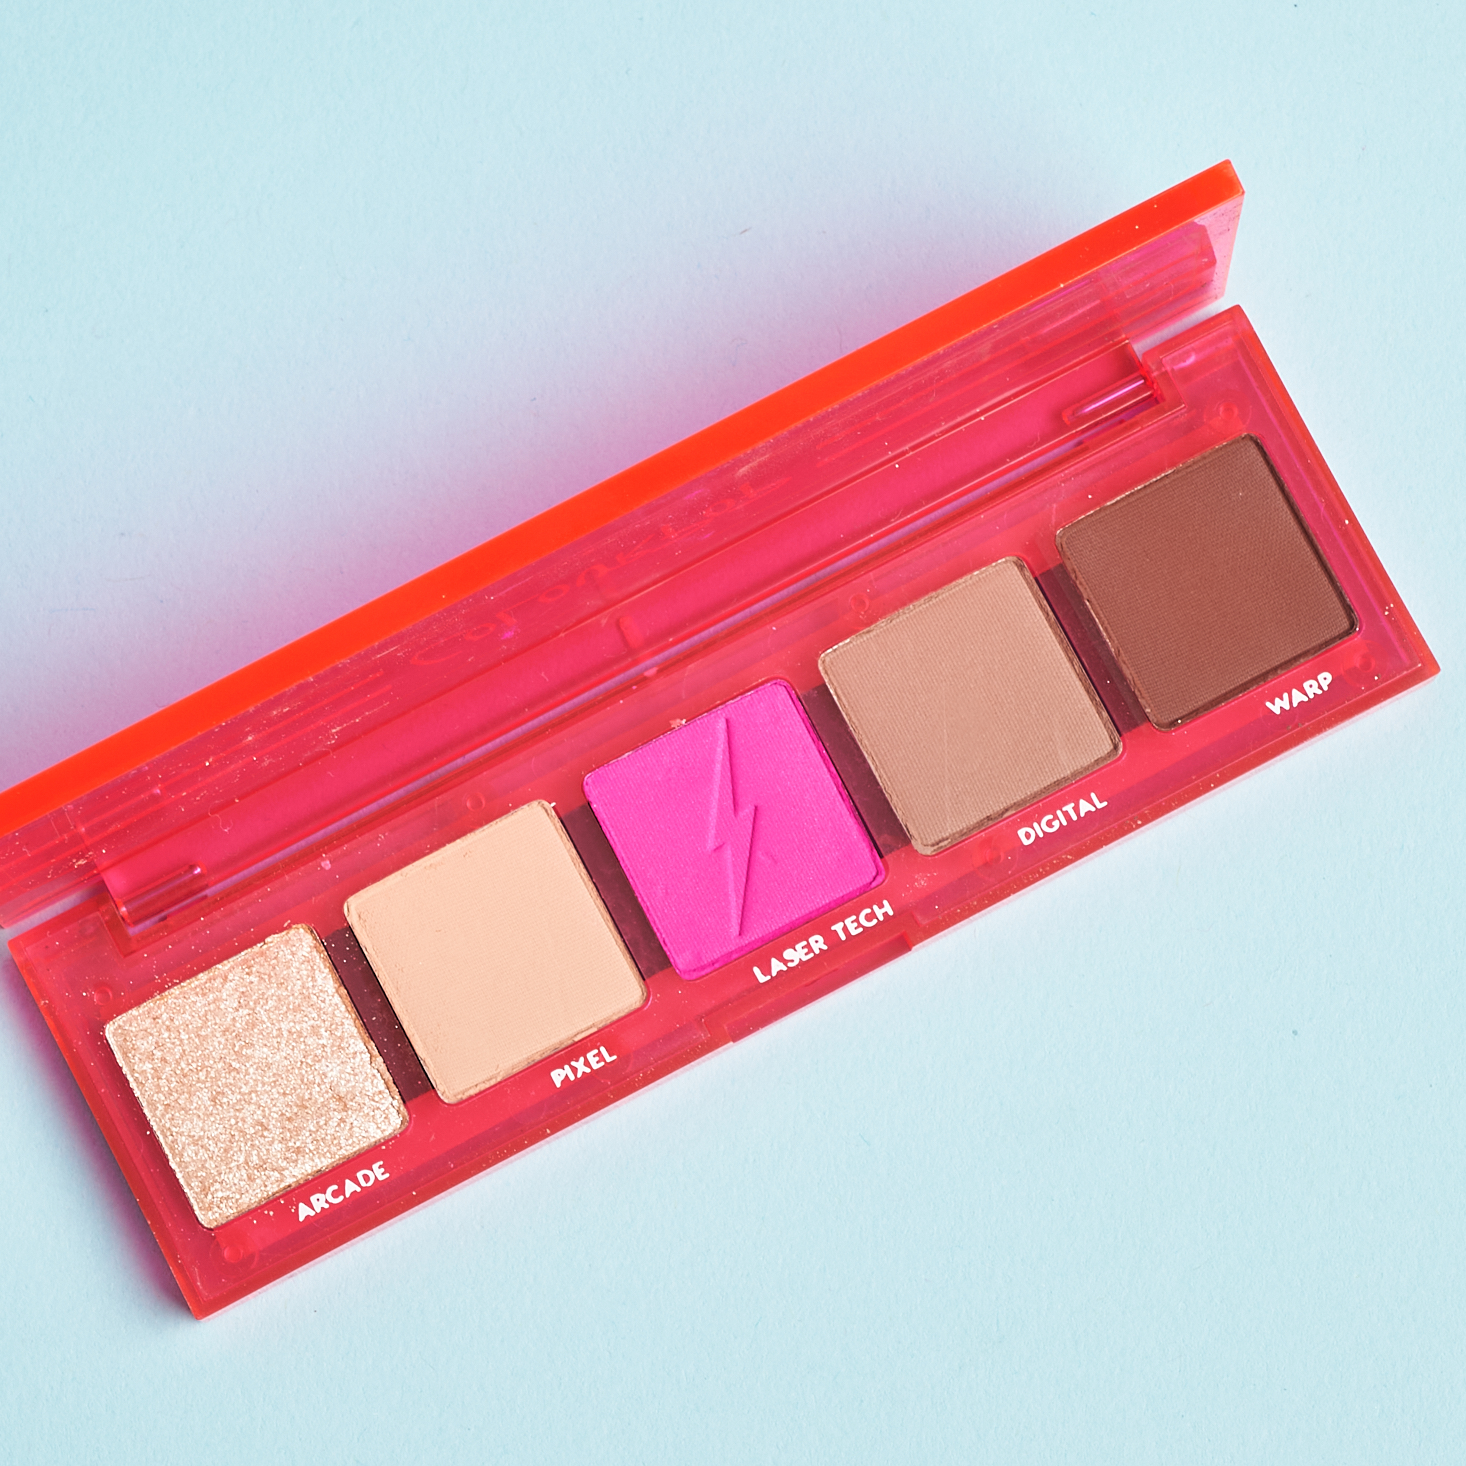 opened Neon pink plastic eyeshadow palette showing four brown shades and a neon pink shade